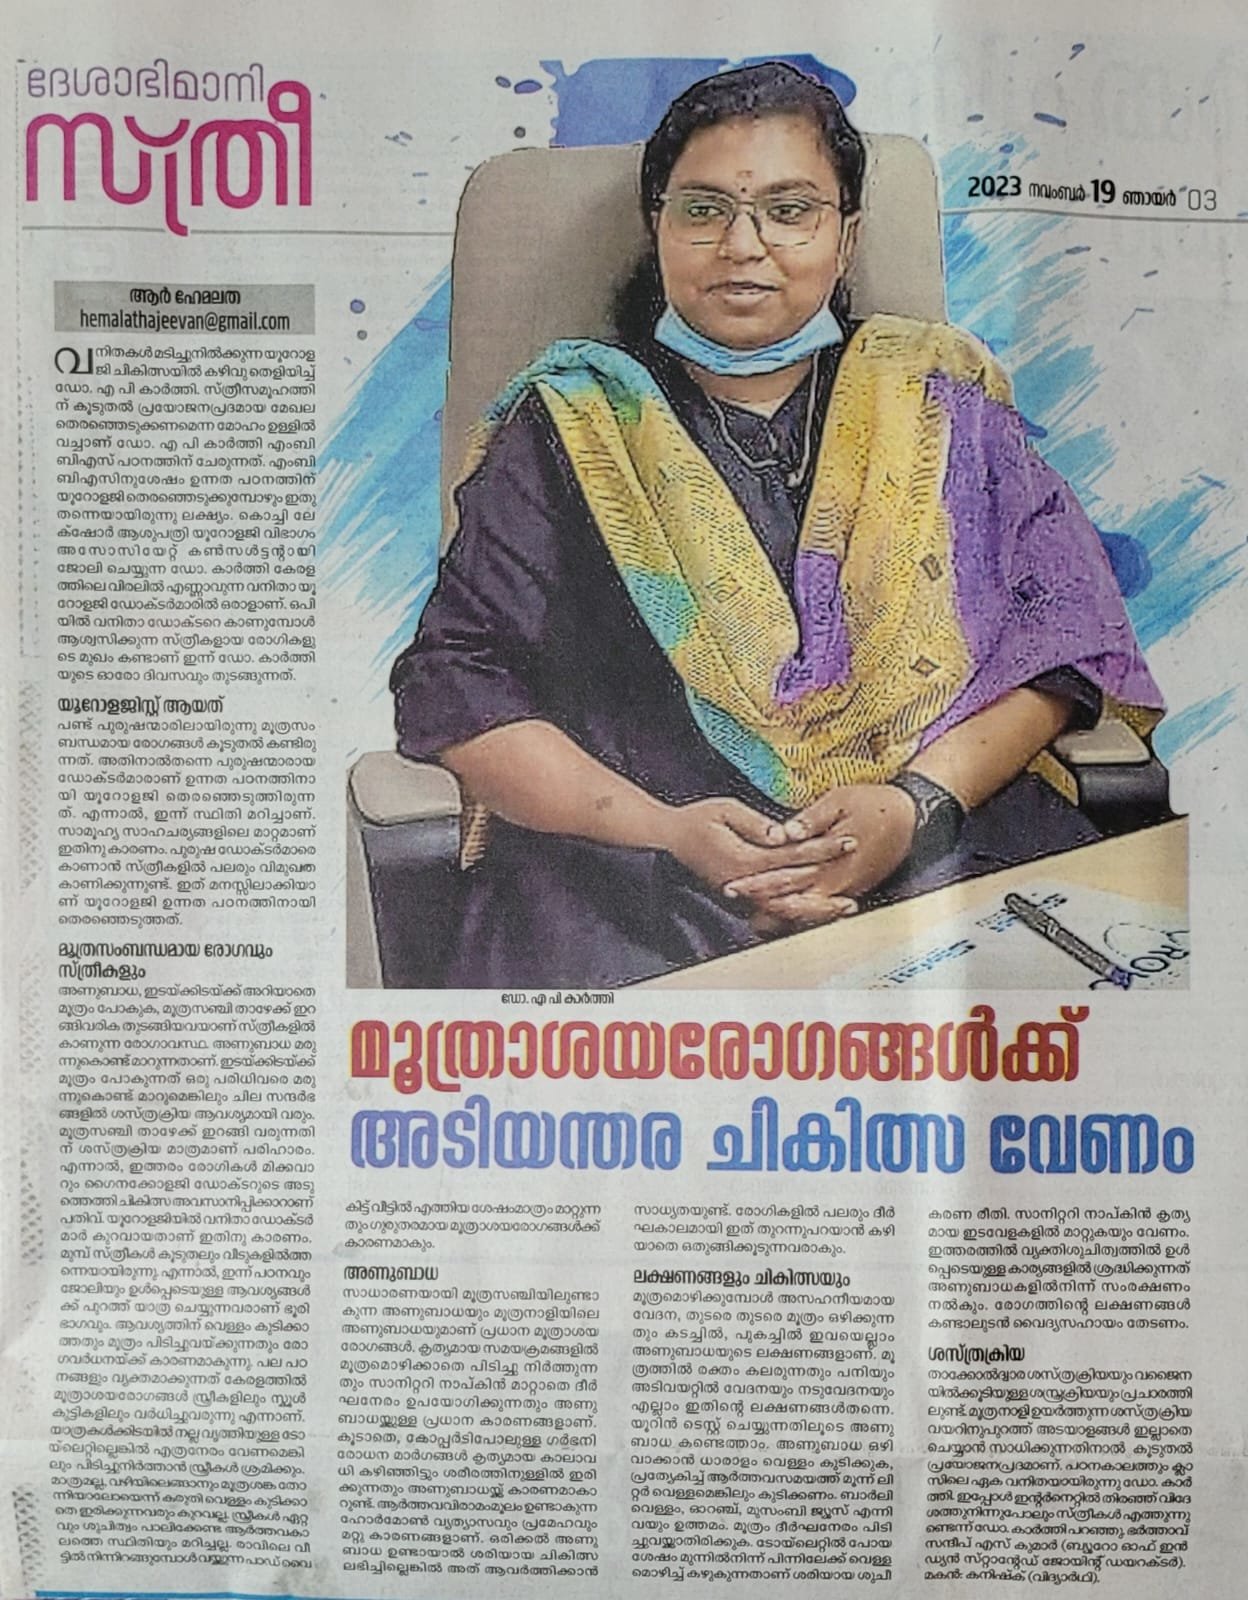 VPS Lakeshore Woman  Urologist Dr. Kaarthi A P in Deshabhimani daily Sunday supplement